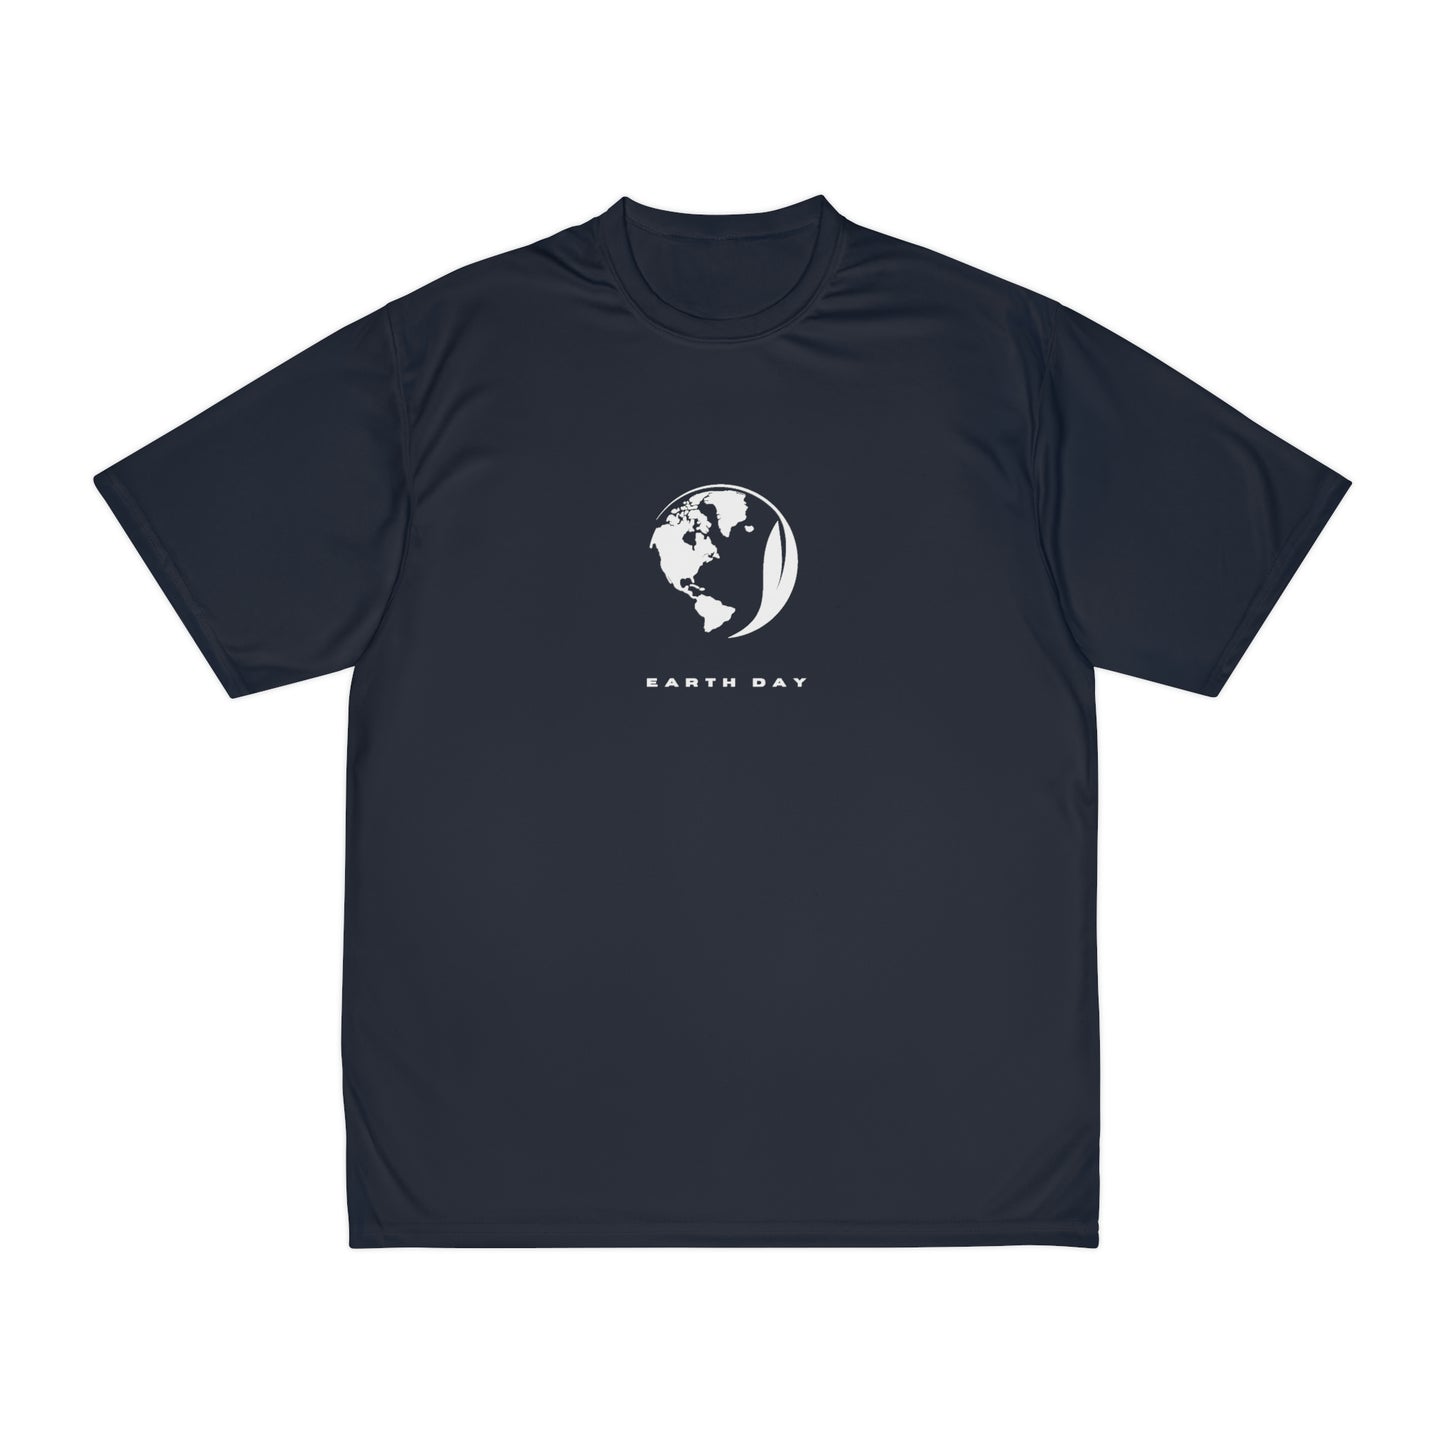 EARTH DAY - Men's Performance T-Shirt